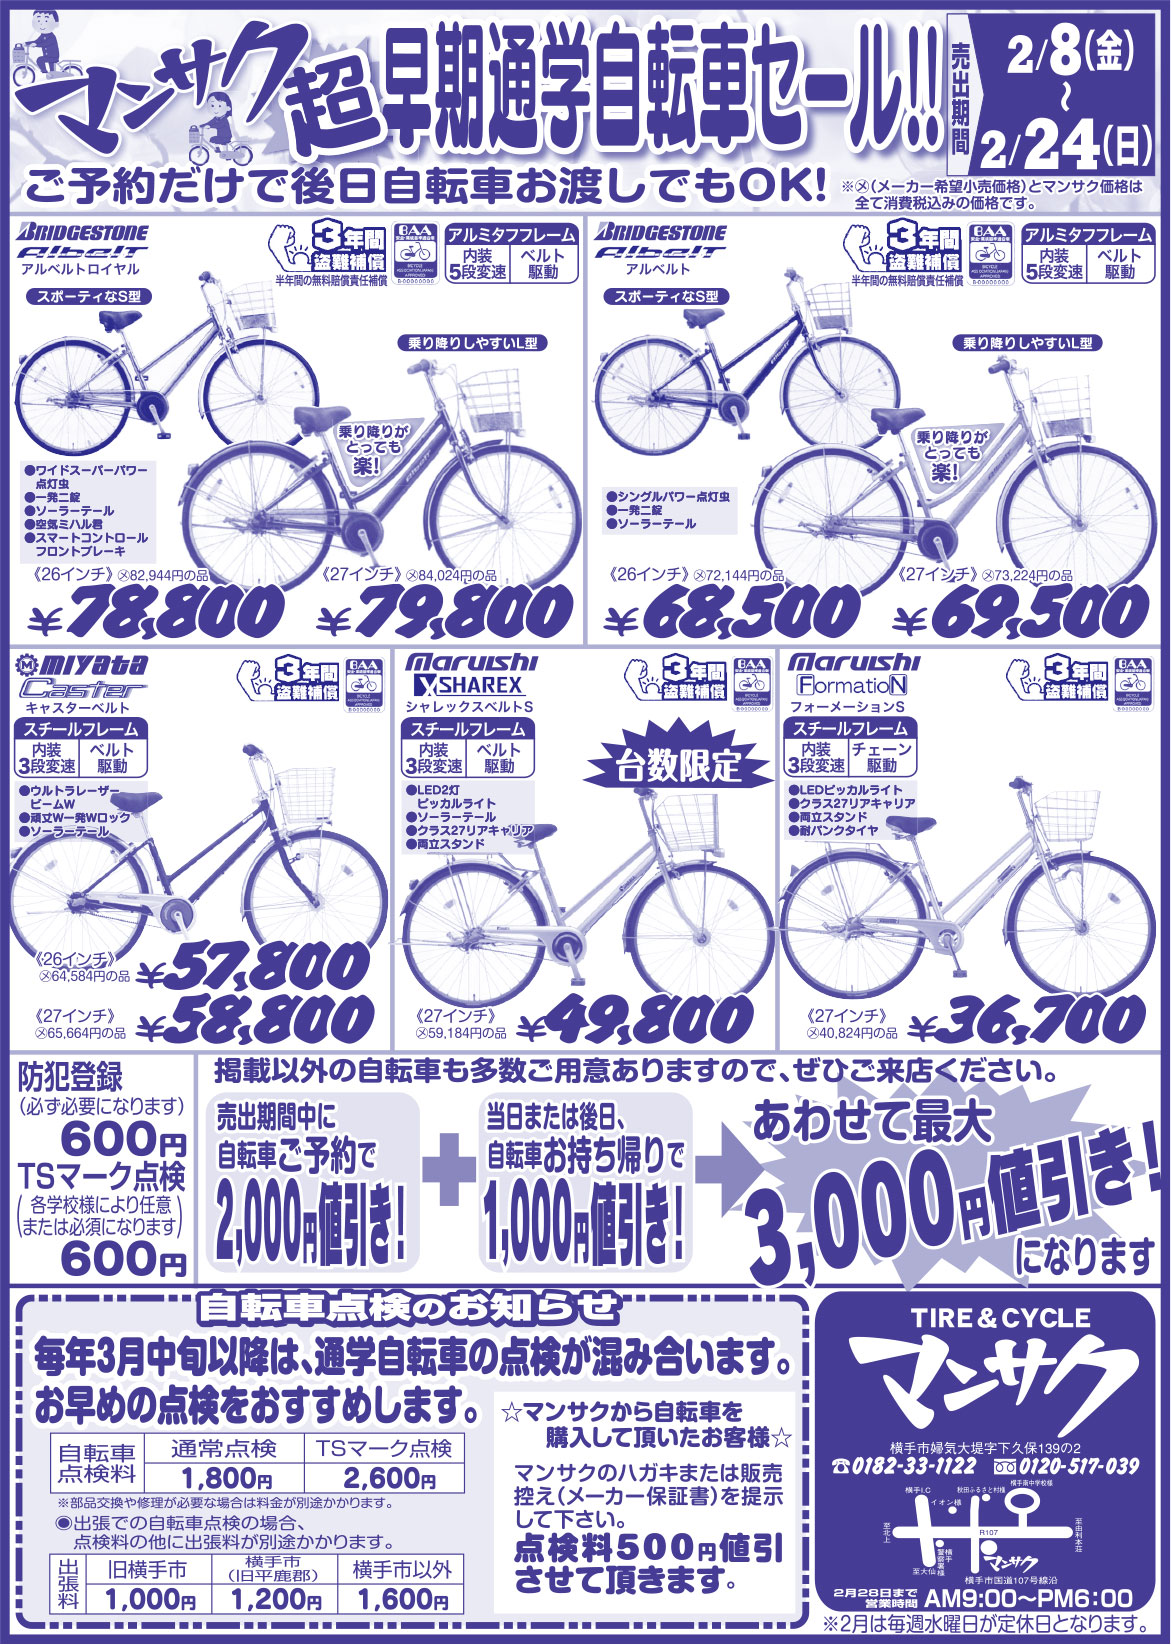 TIRE&CYCLE マンサク 様